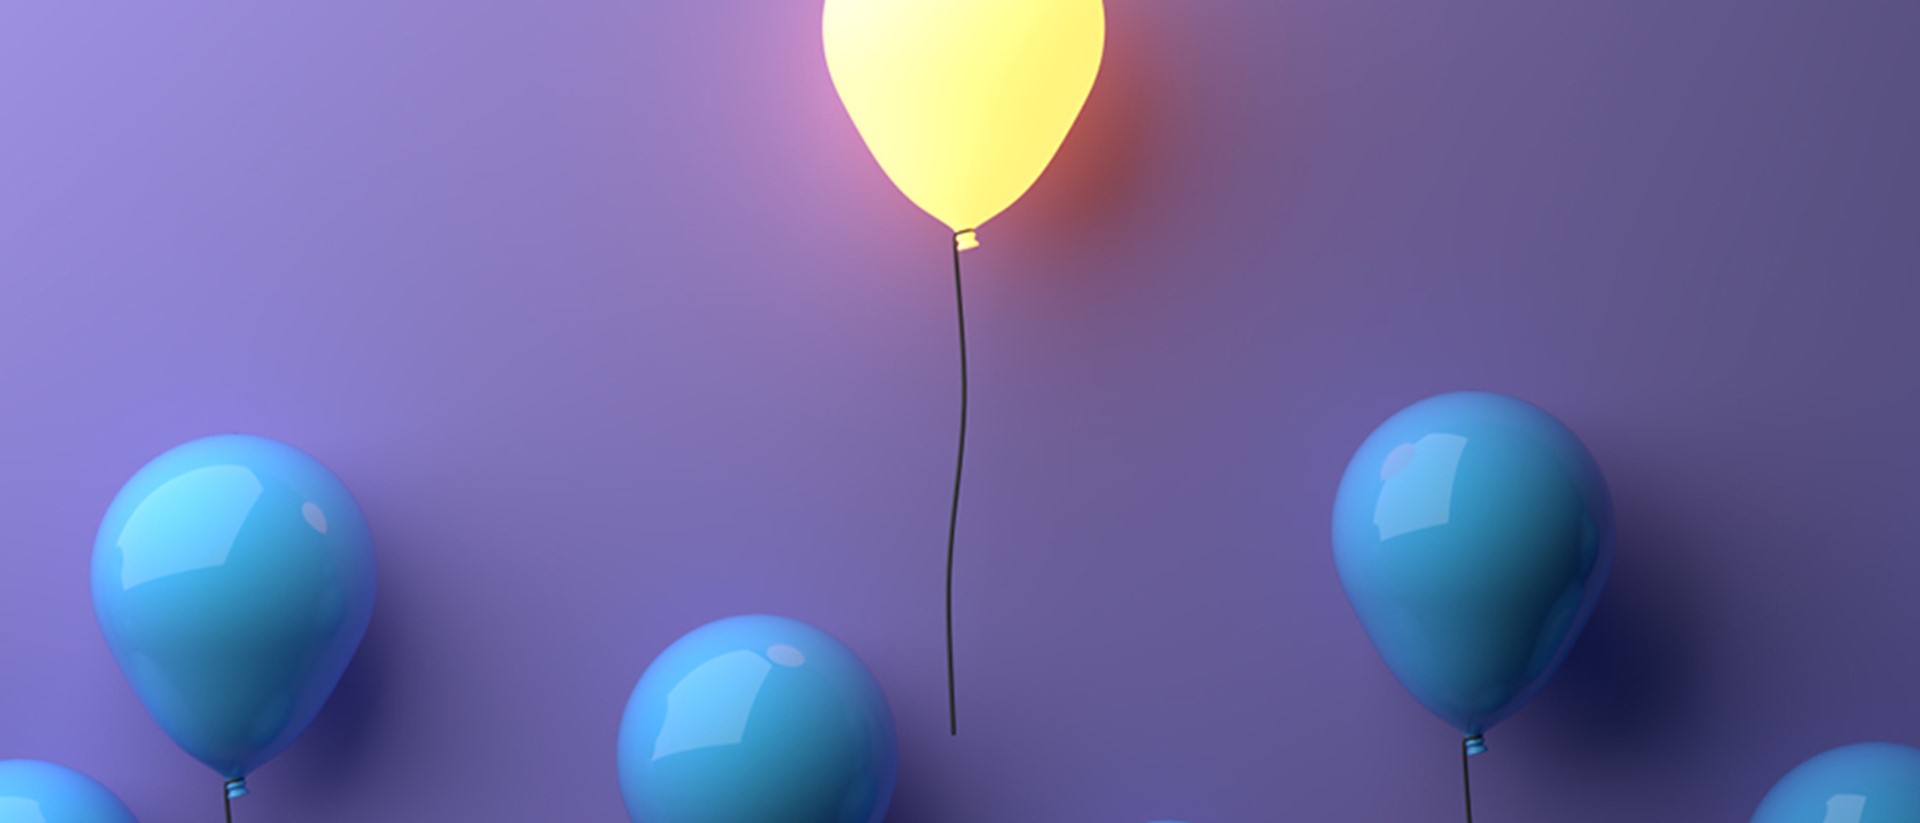 Image of 3 blue balloons and 1 yellow balloon on a purple background